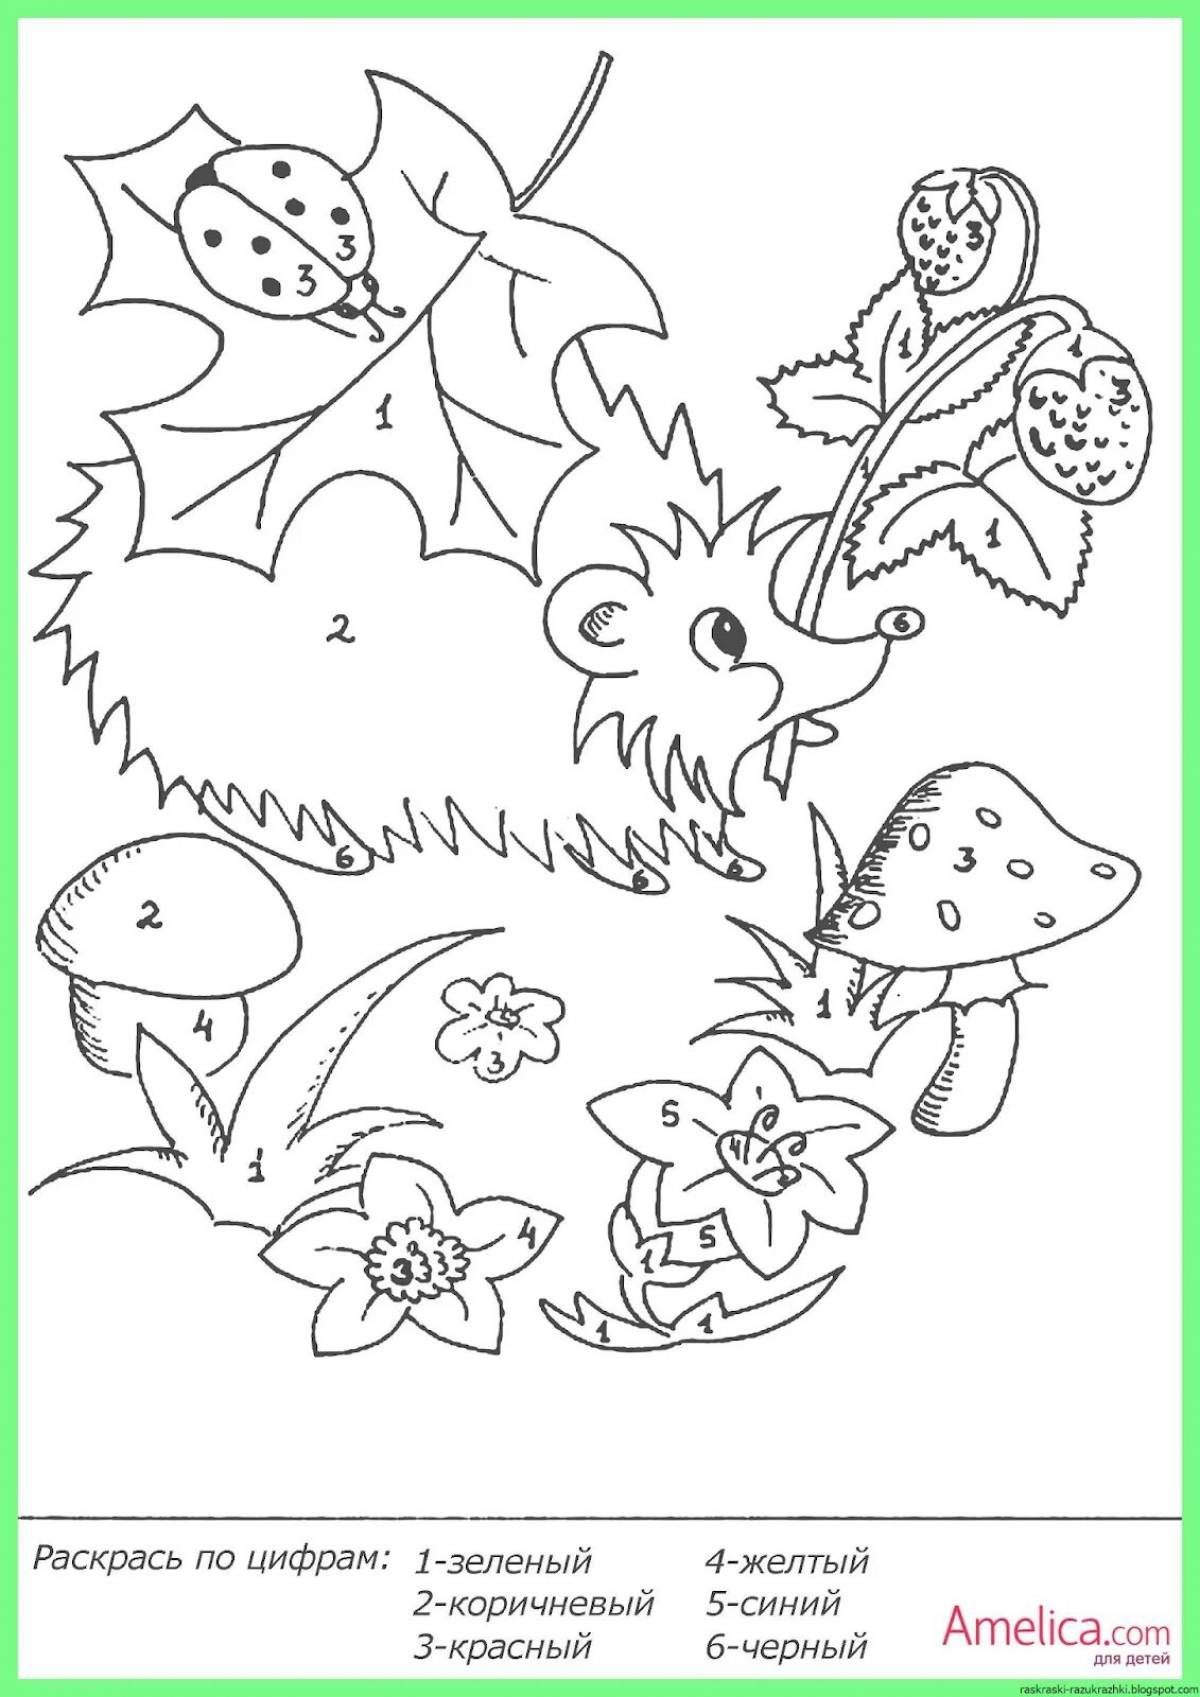 Color-delightful coloring page digital for children 6-7 years old